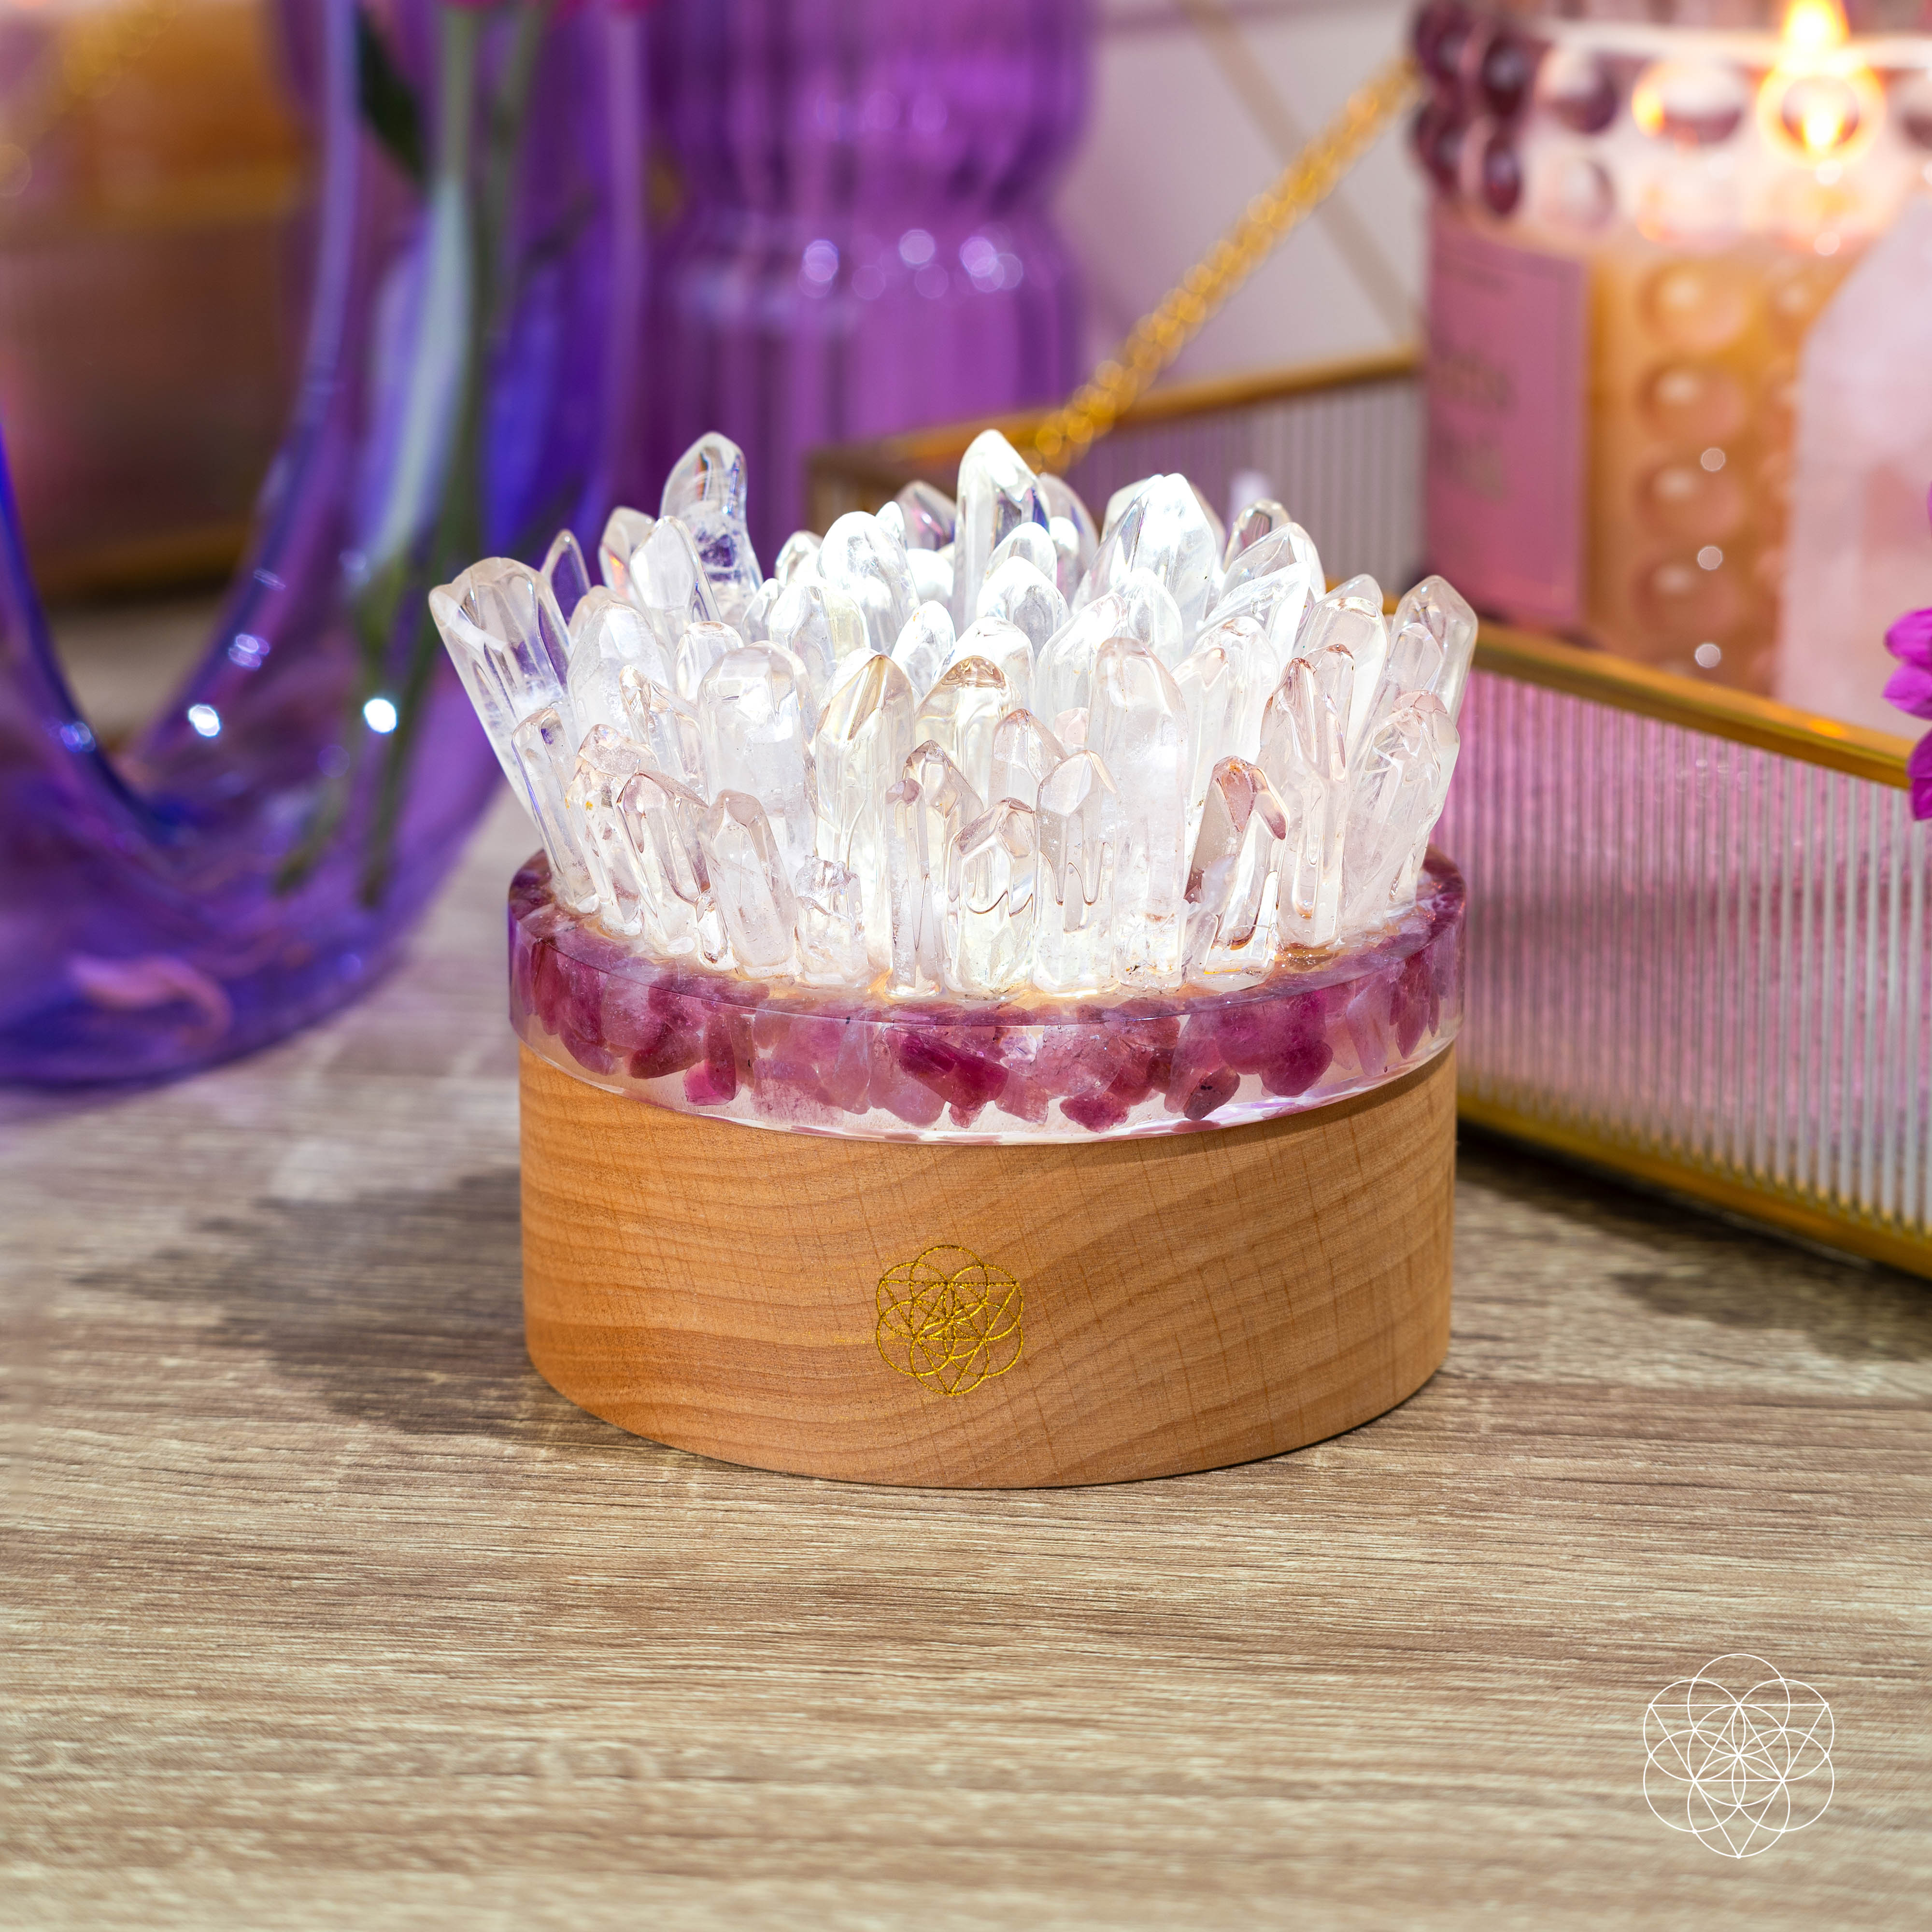 Find My Peace - Quartz & Tourmaline Lamp of Blooming Tranquility